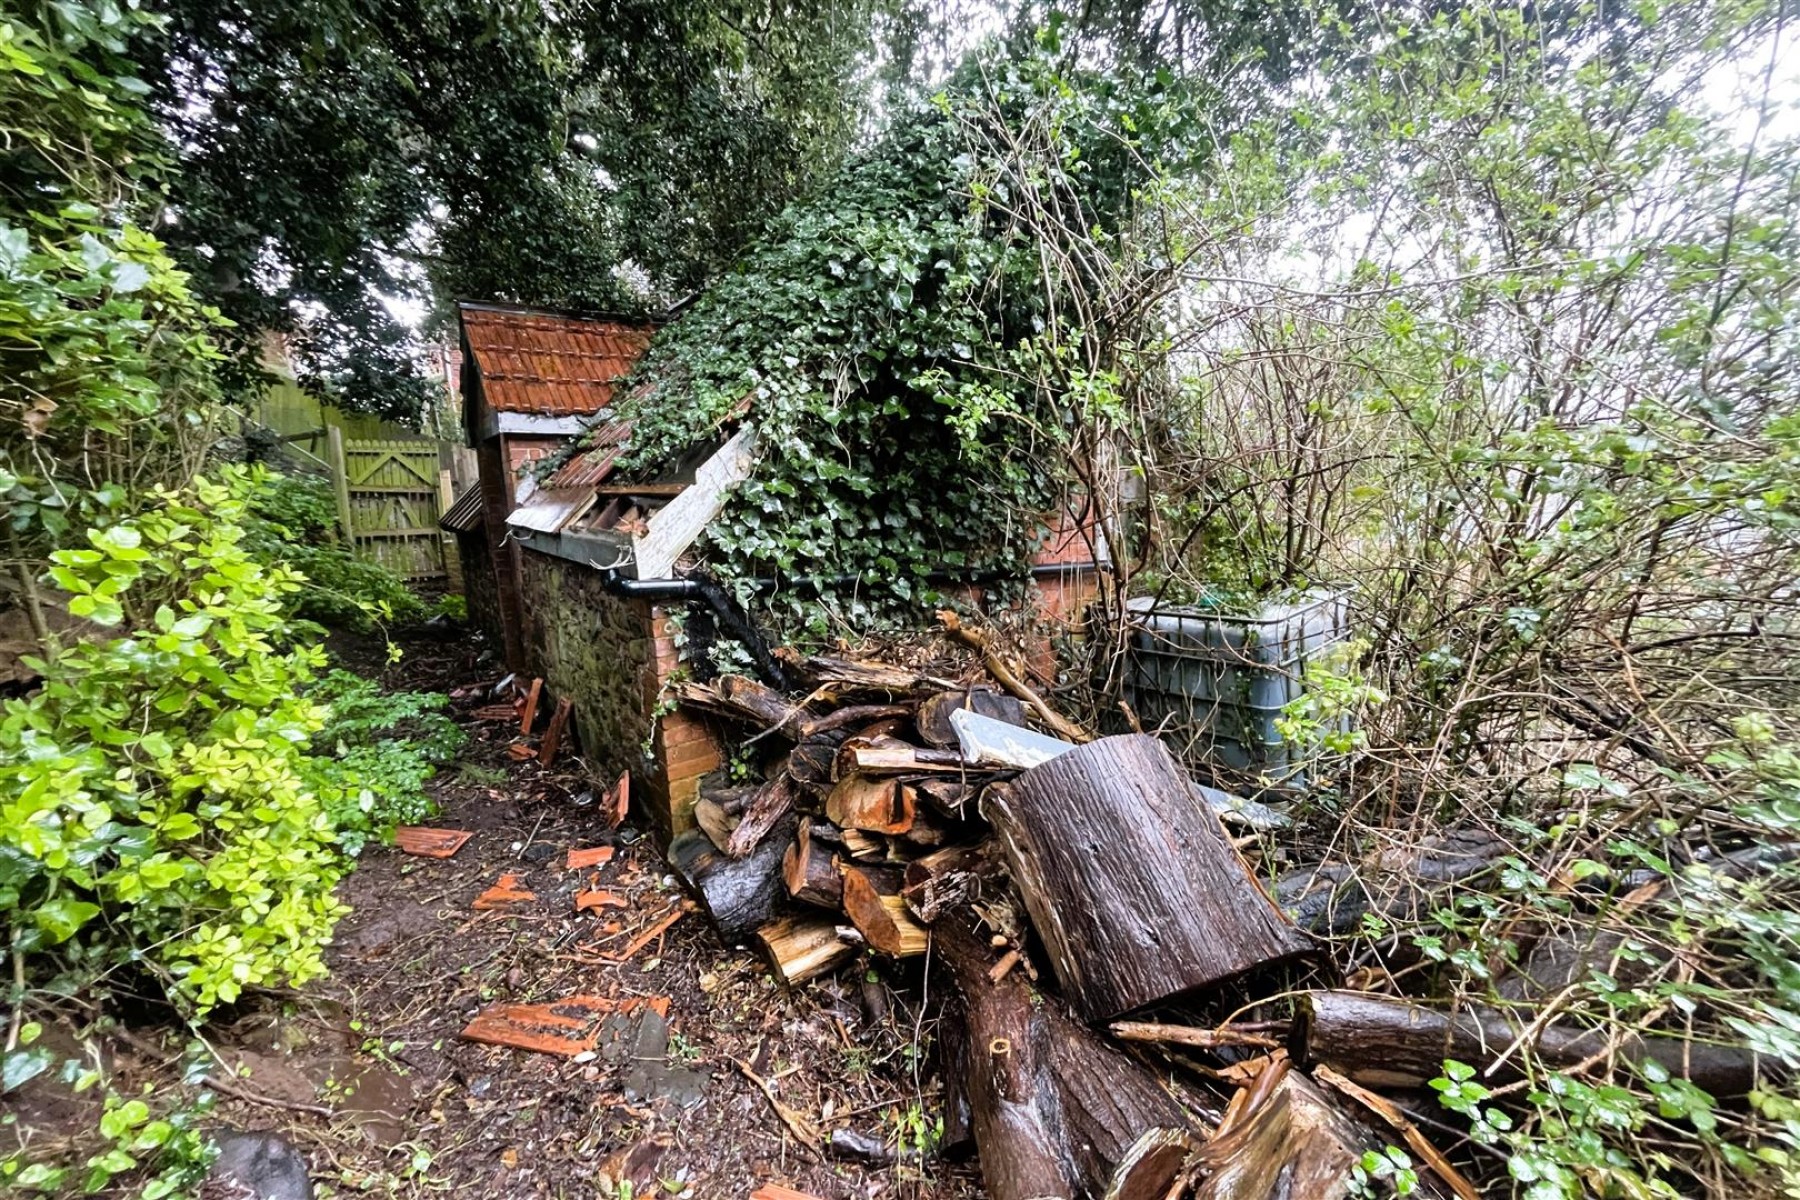 Images for 1 ACRE | DERELICT COTTAGE | MINEHEAD